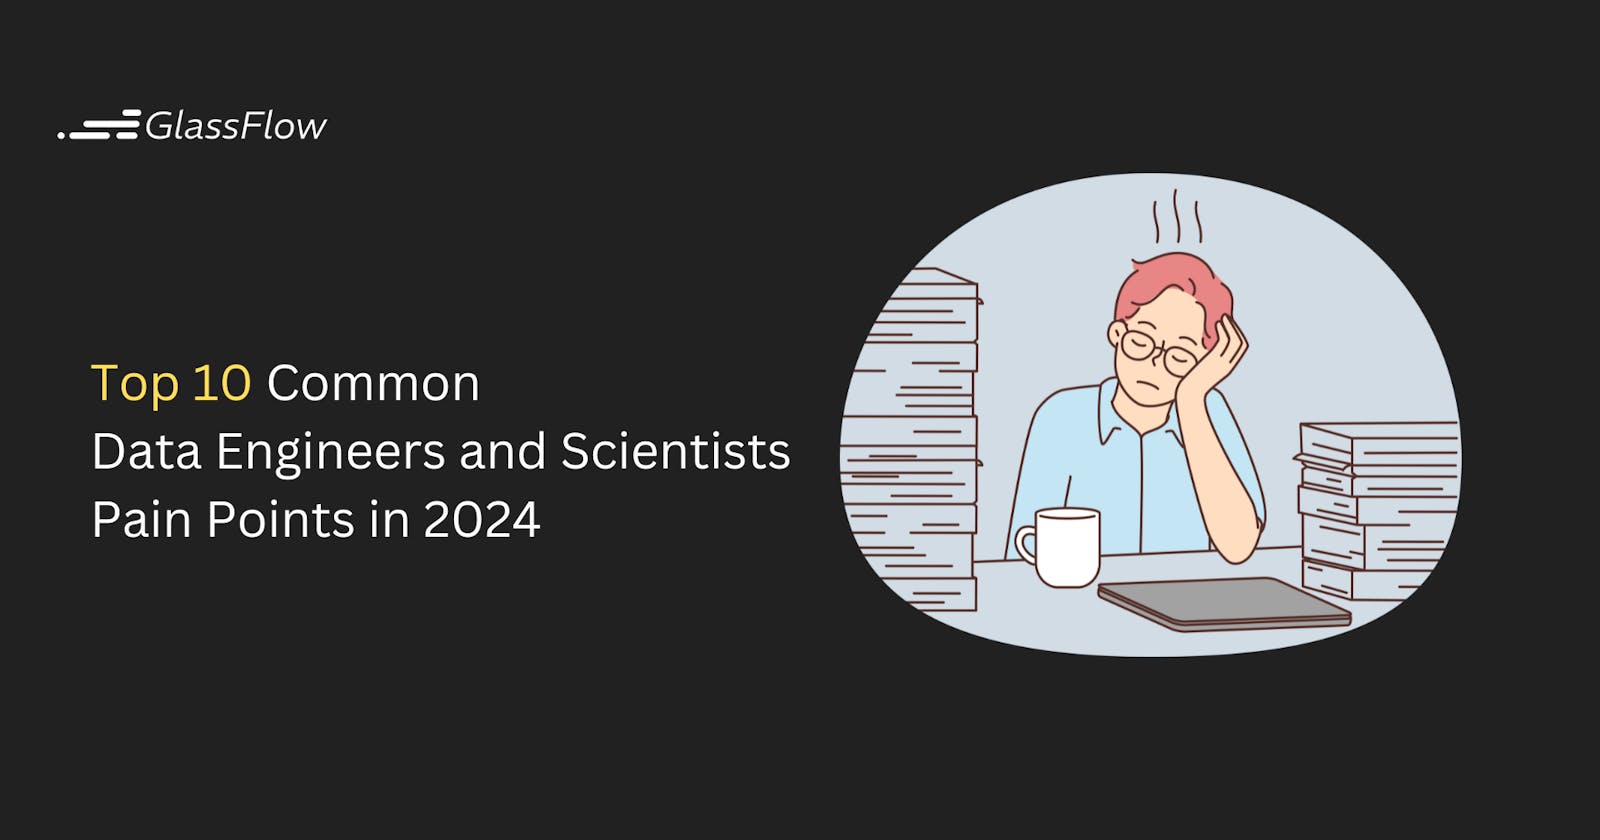 Top 10 Common Data Engineers and Scientists Pain Points in 2024